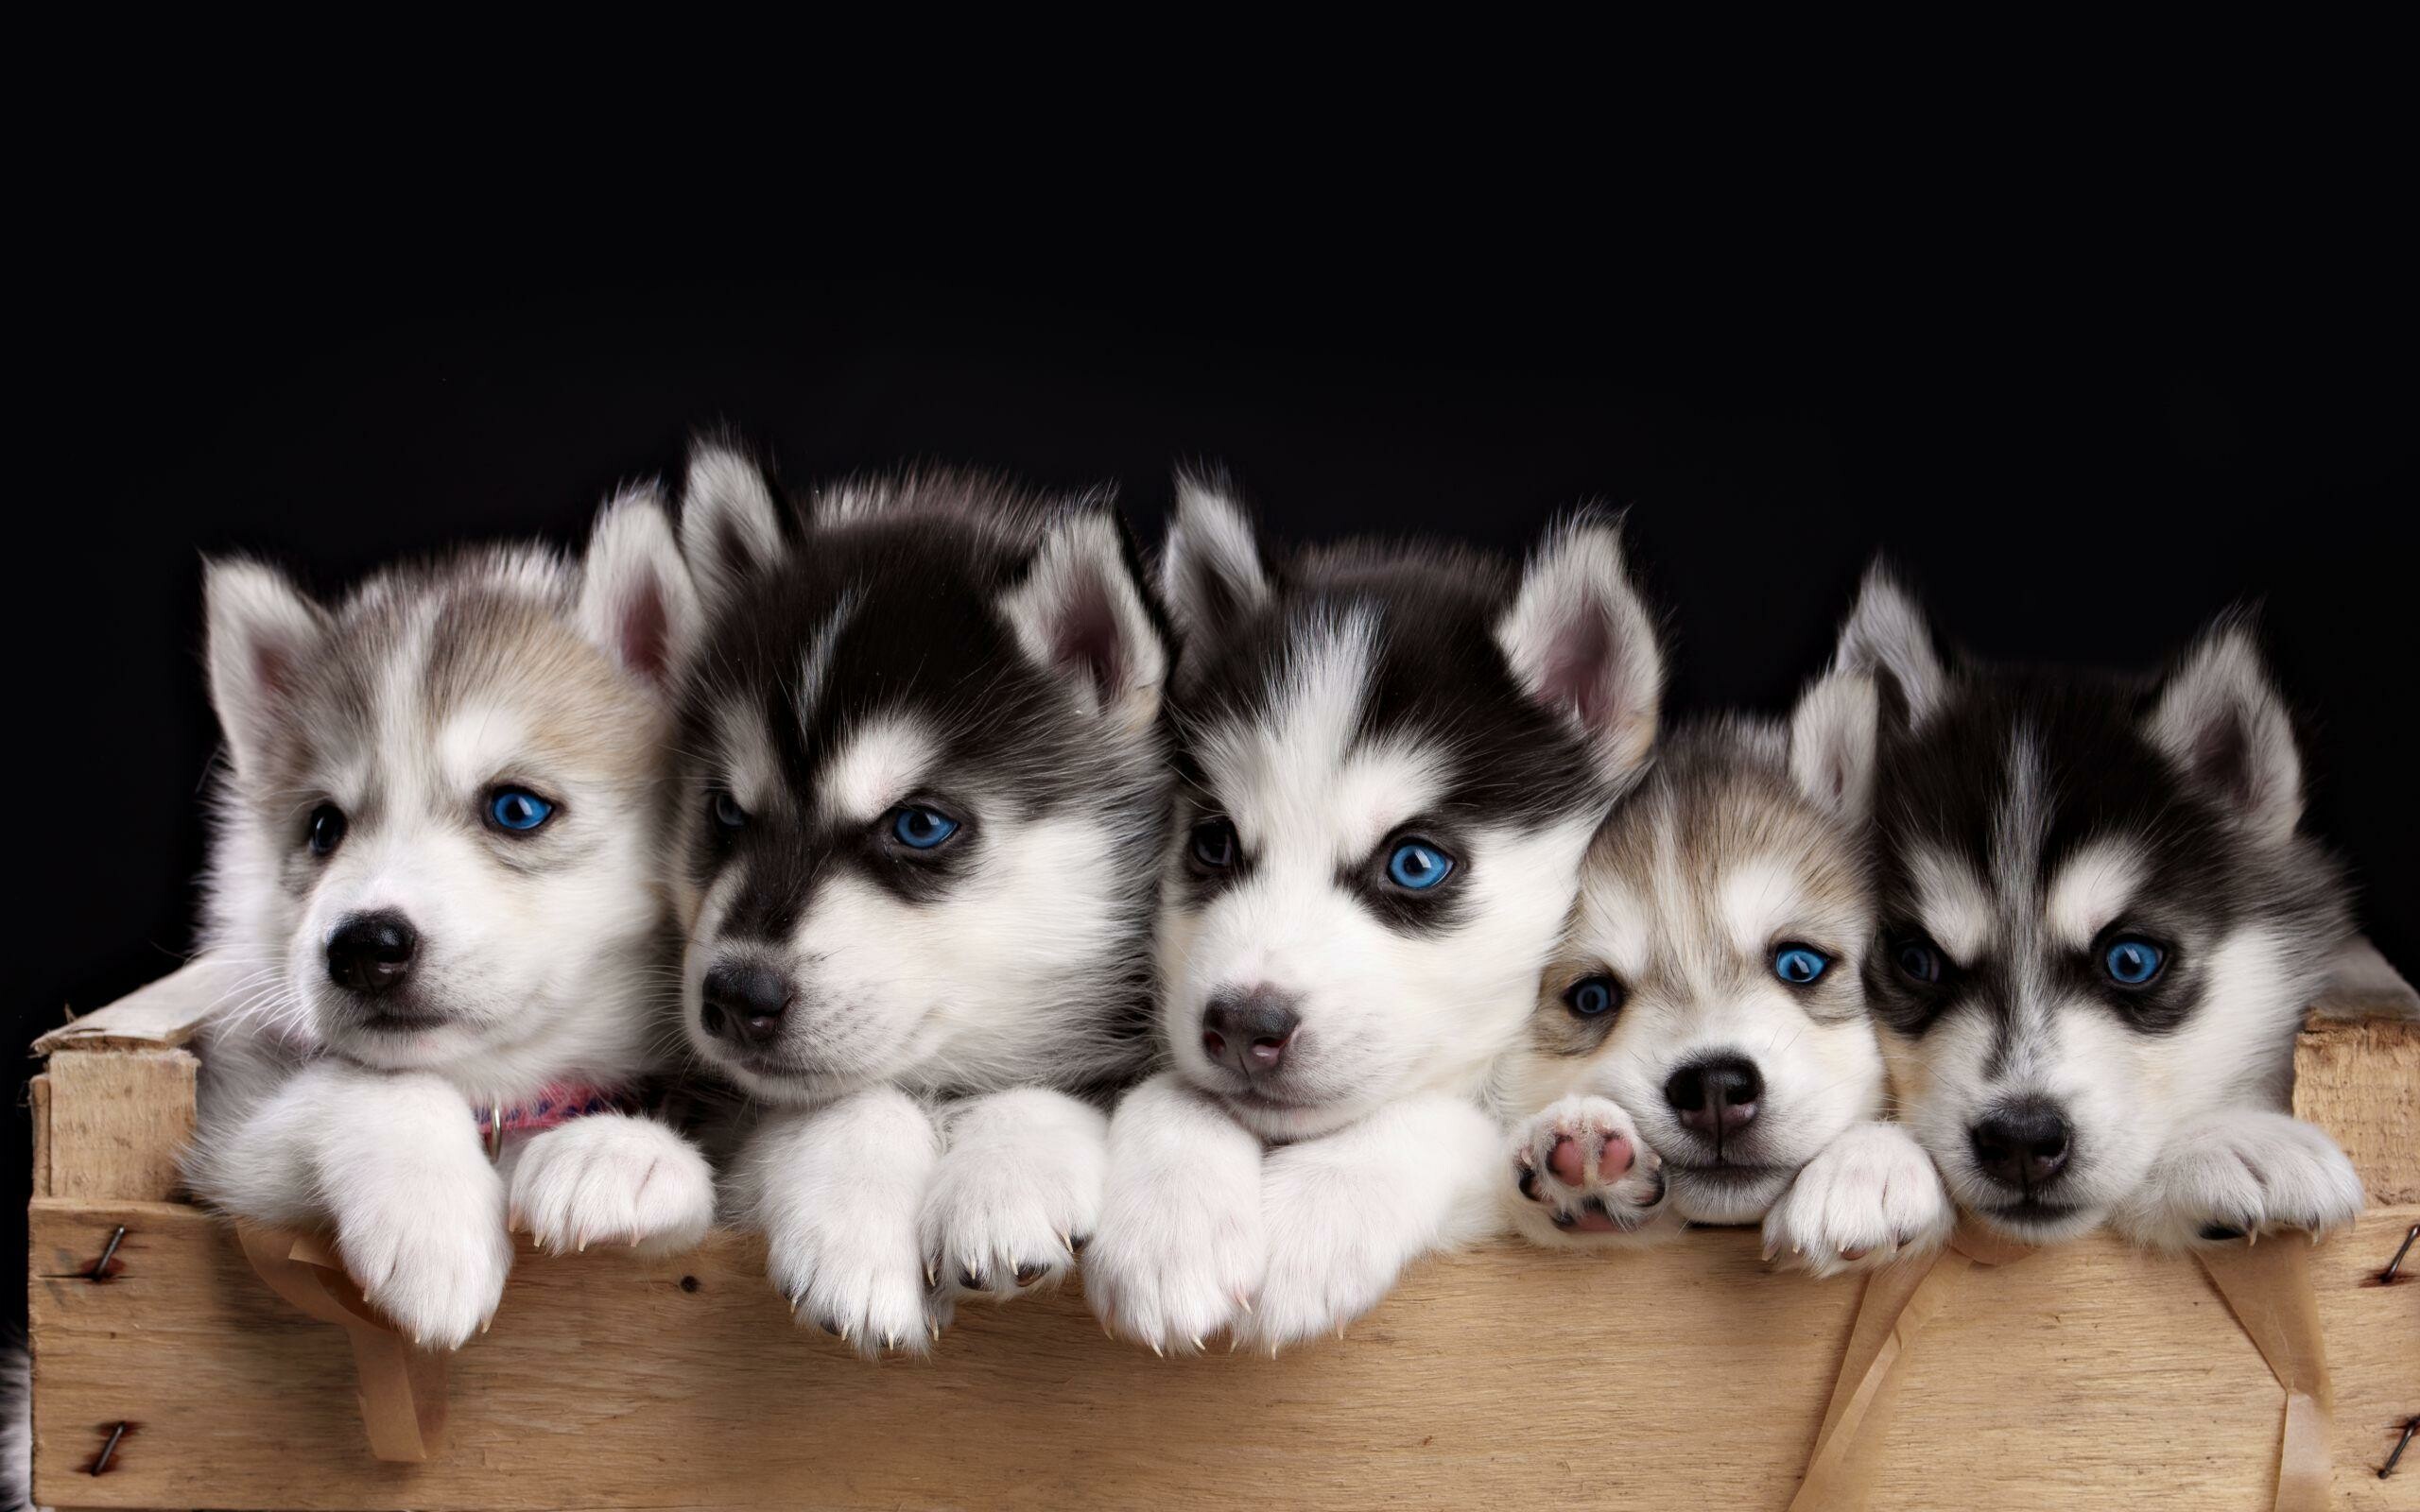 Siberian Husky: The dog has a double coat that is thicker than that of most other dog breeds. 2560x1600 HD Wallpaper.